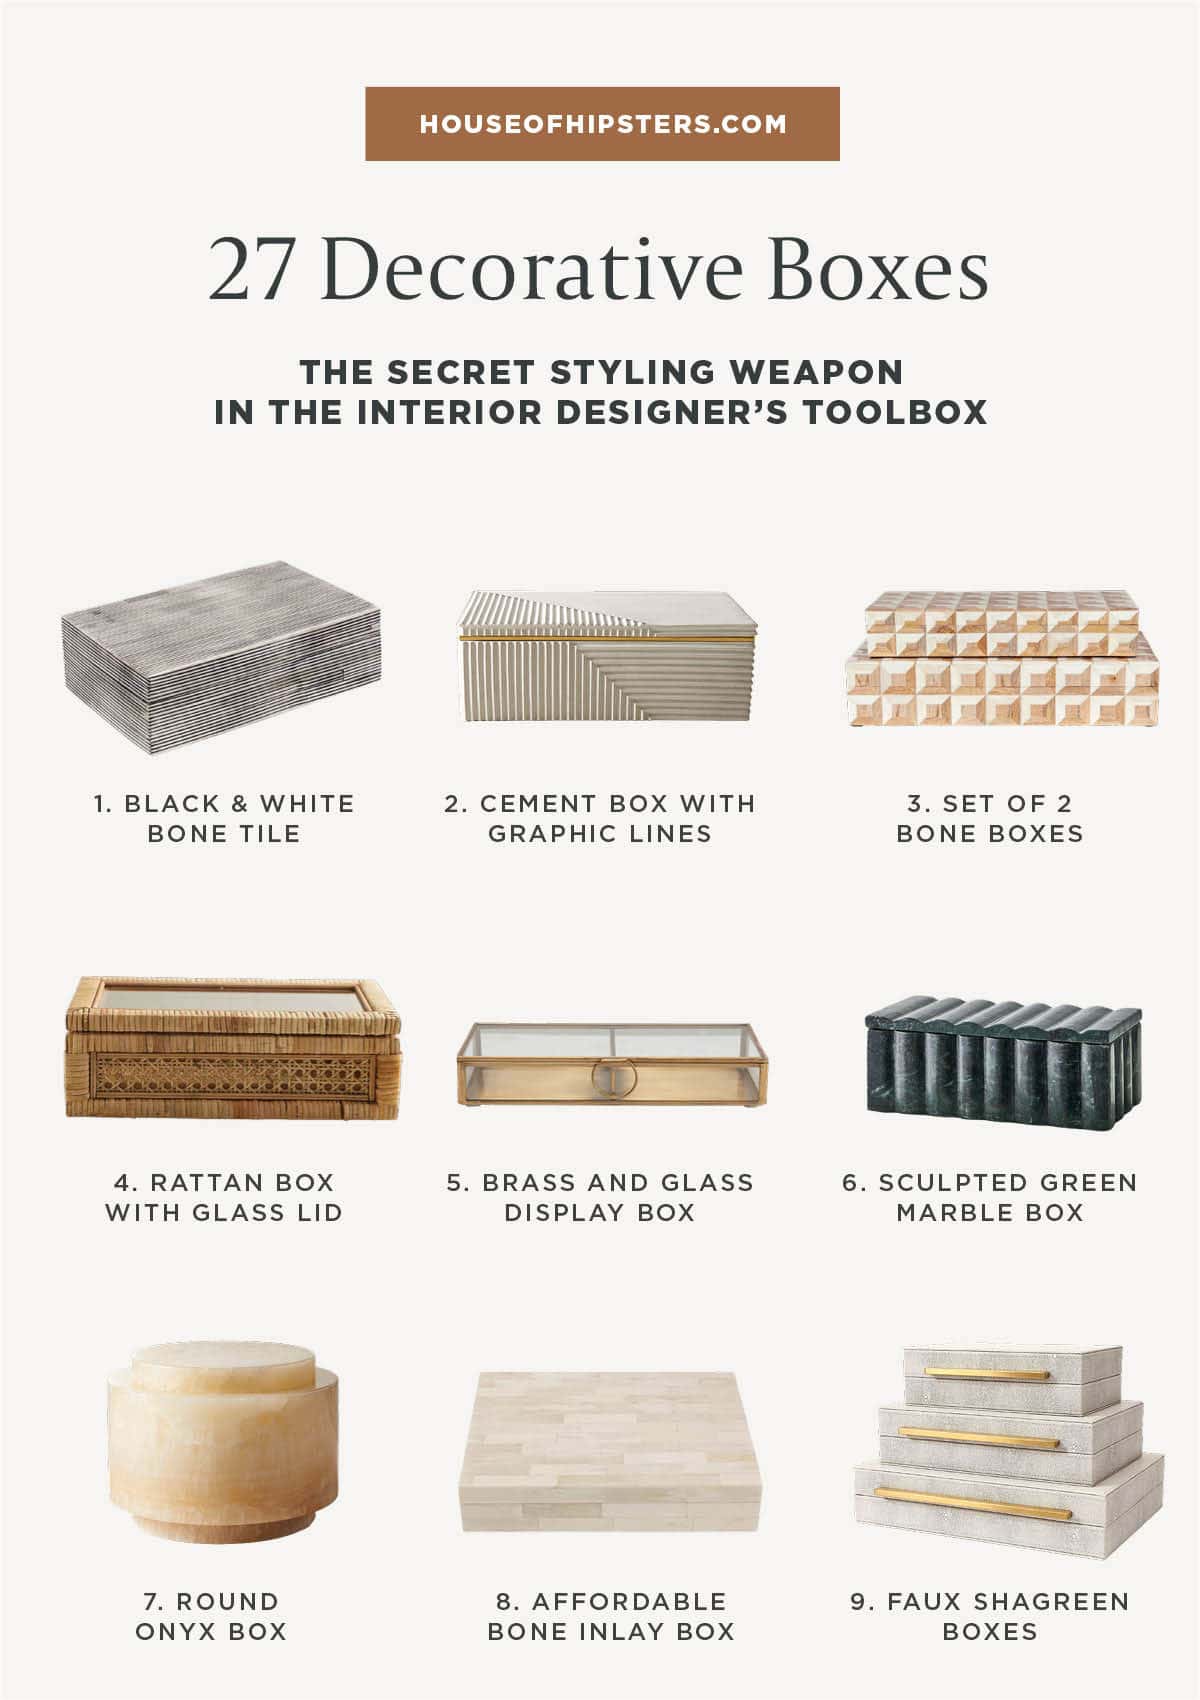 27 Beautiful Decorative Boxes - best decorative boxes with lids to elevate your coffee table decor or bookshelf. The box is the interior design's secret weapon.